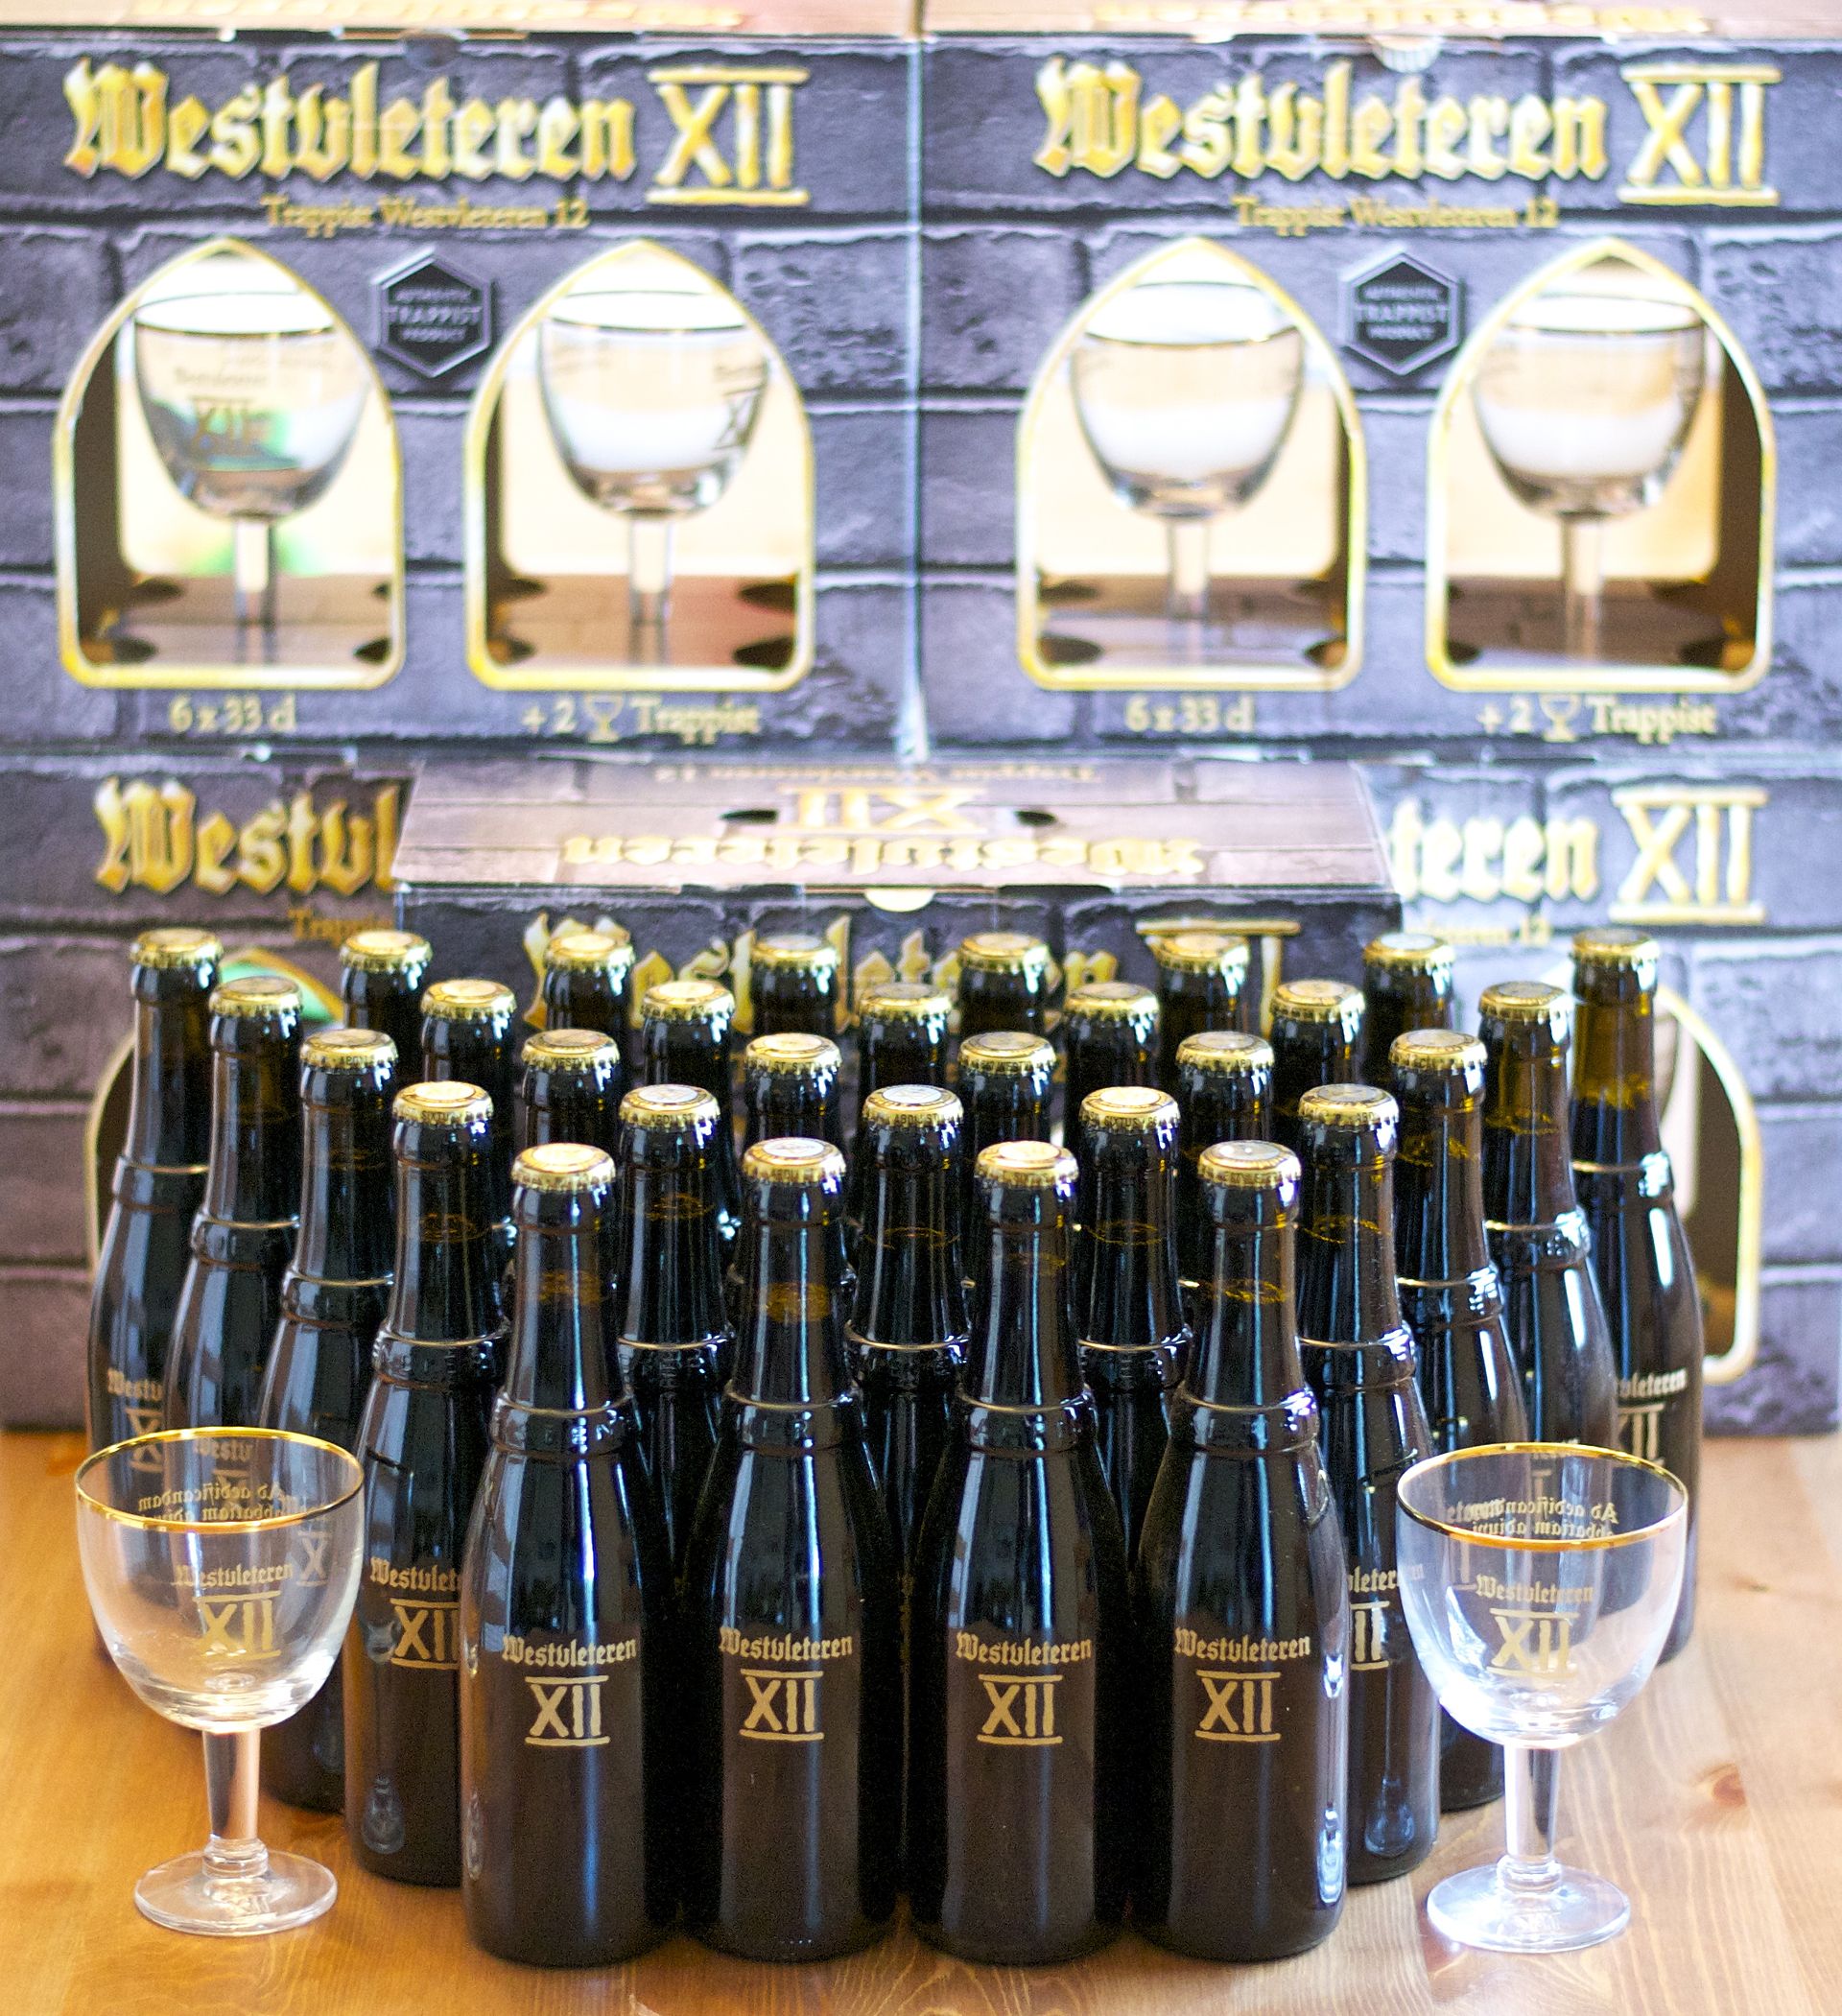 Westvleteren XII with gift packaging and glasses
